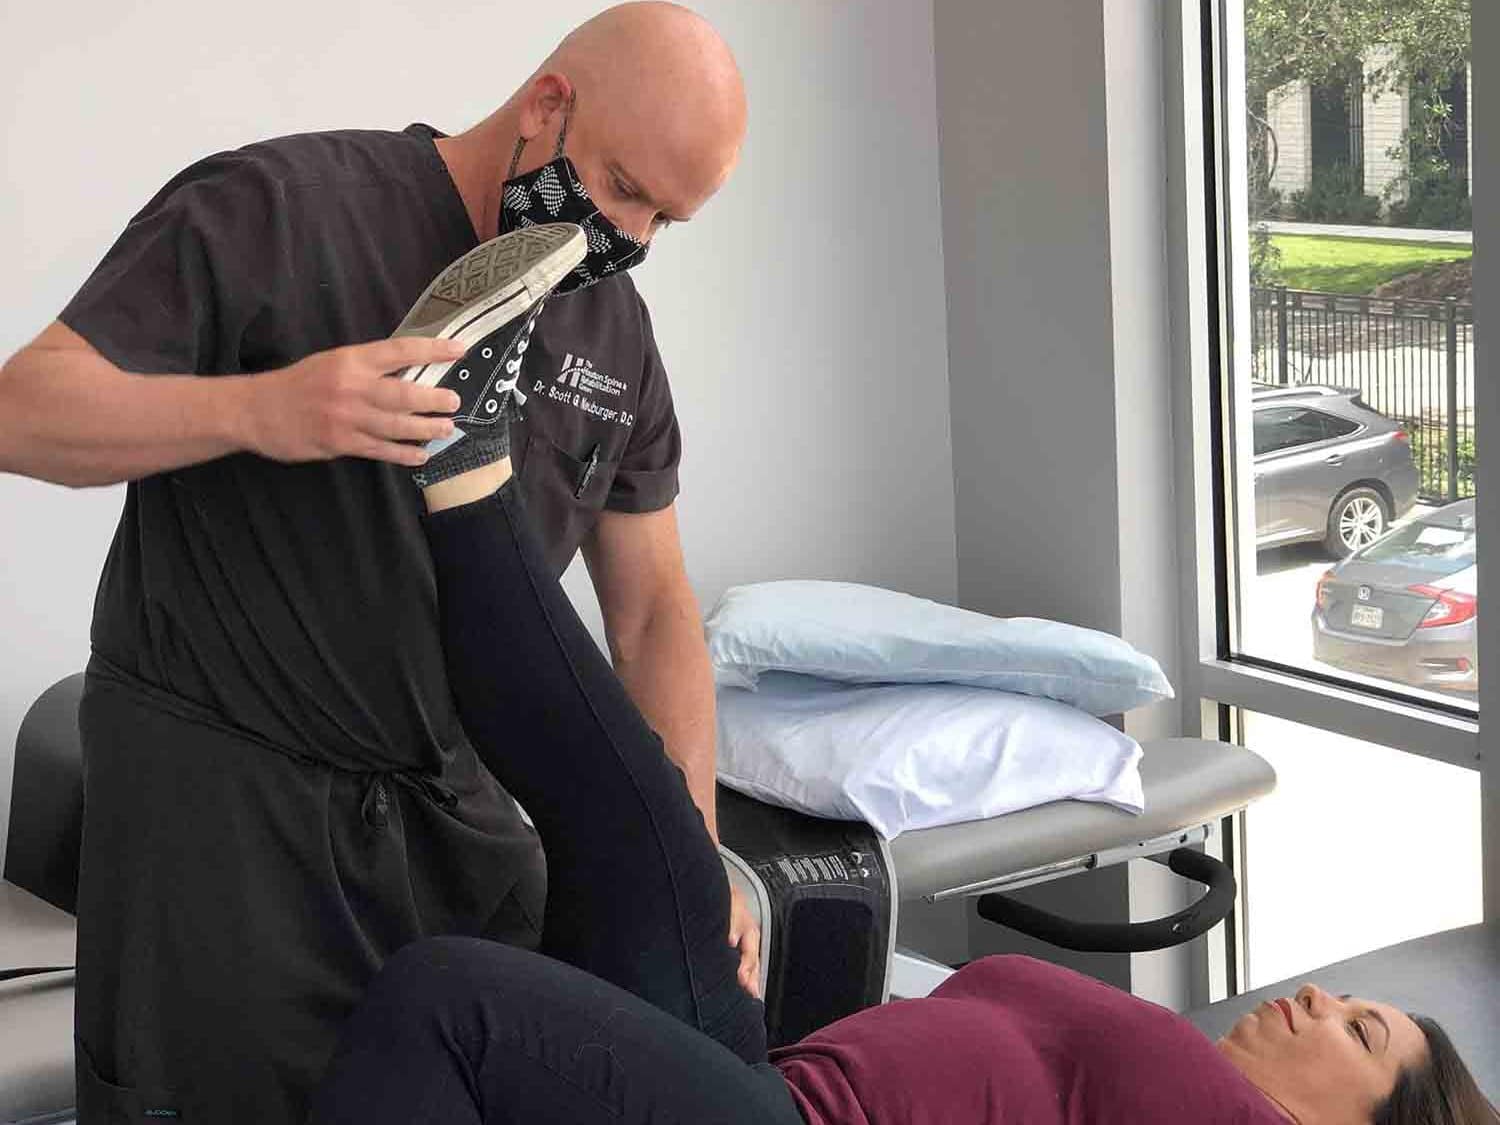 Woodlands chiropractor, Dr. Neuburger, doing adjustments to a patient's leg on a chiropractic table